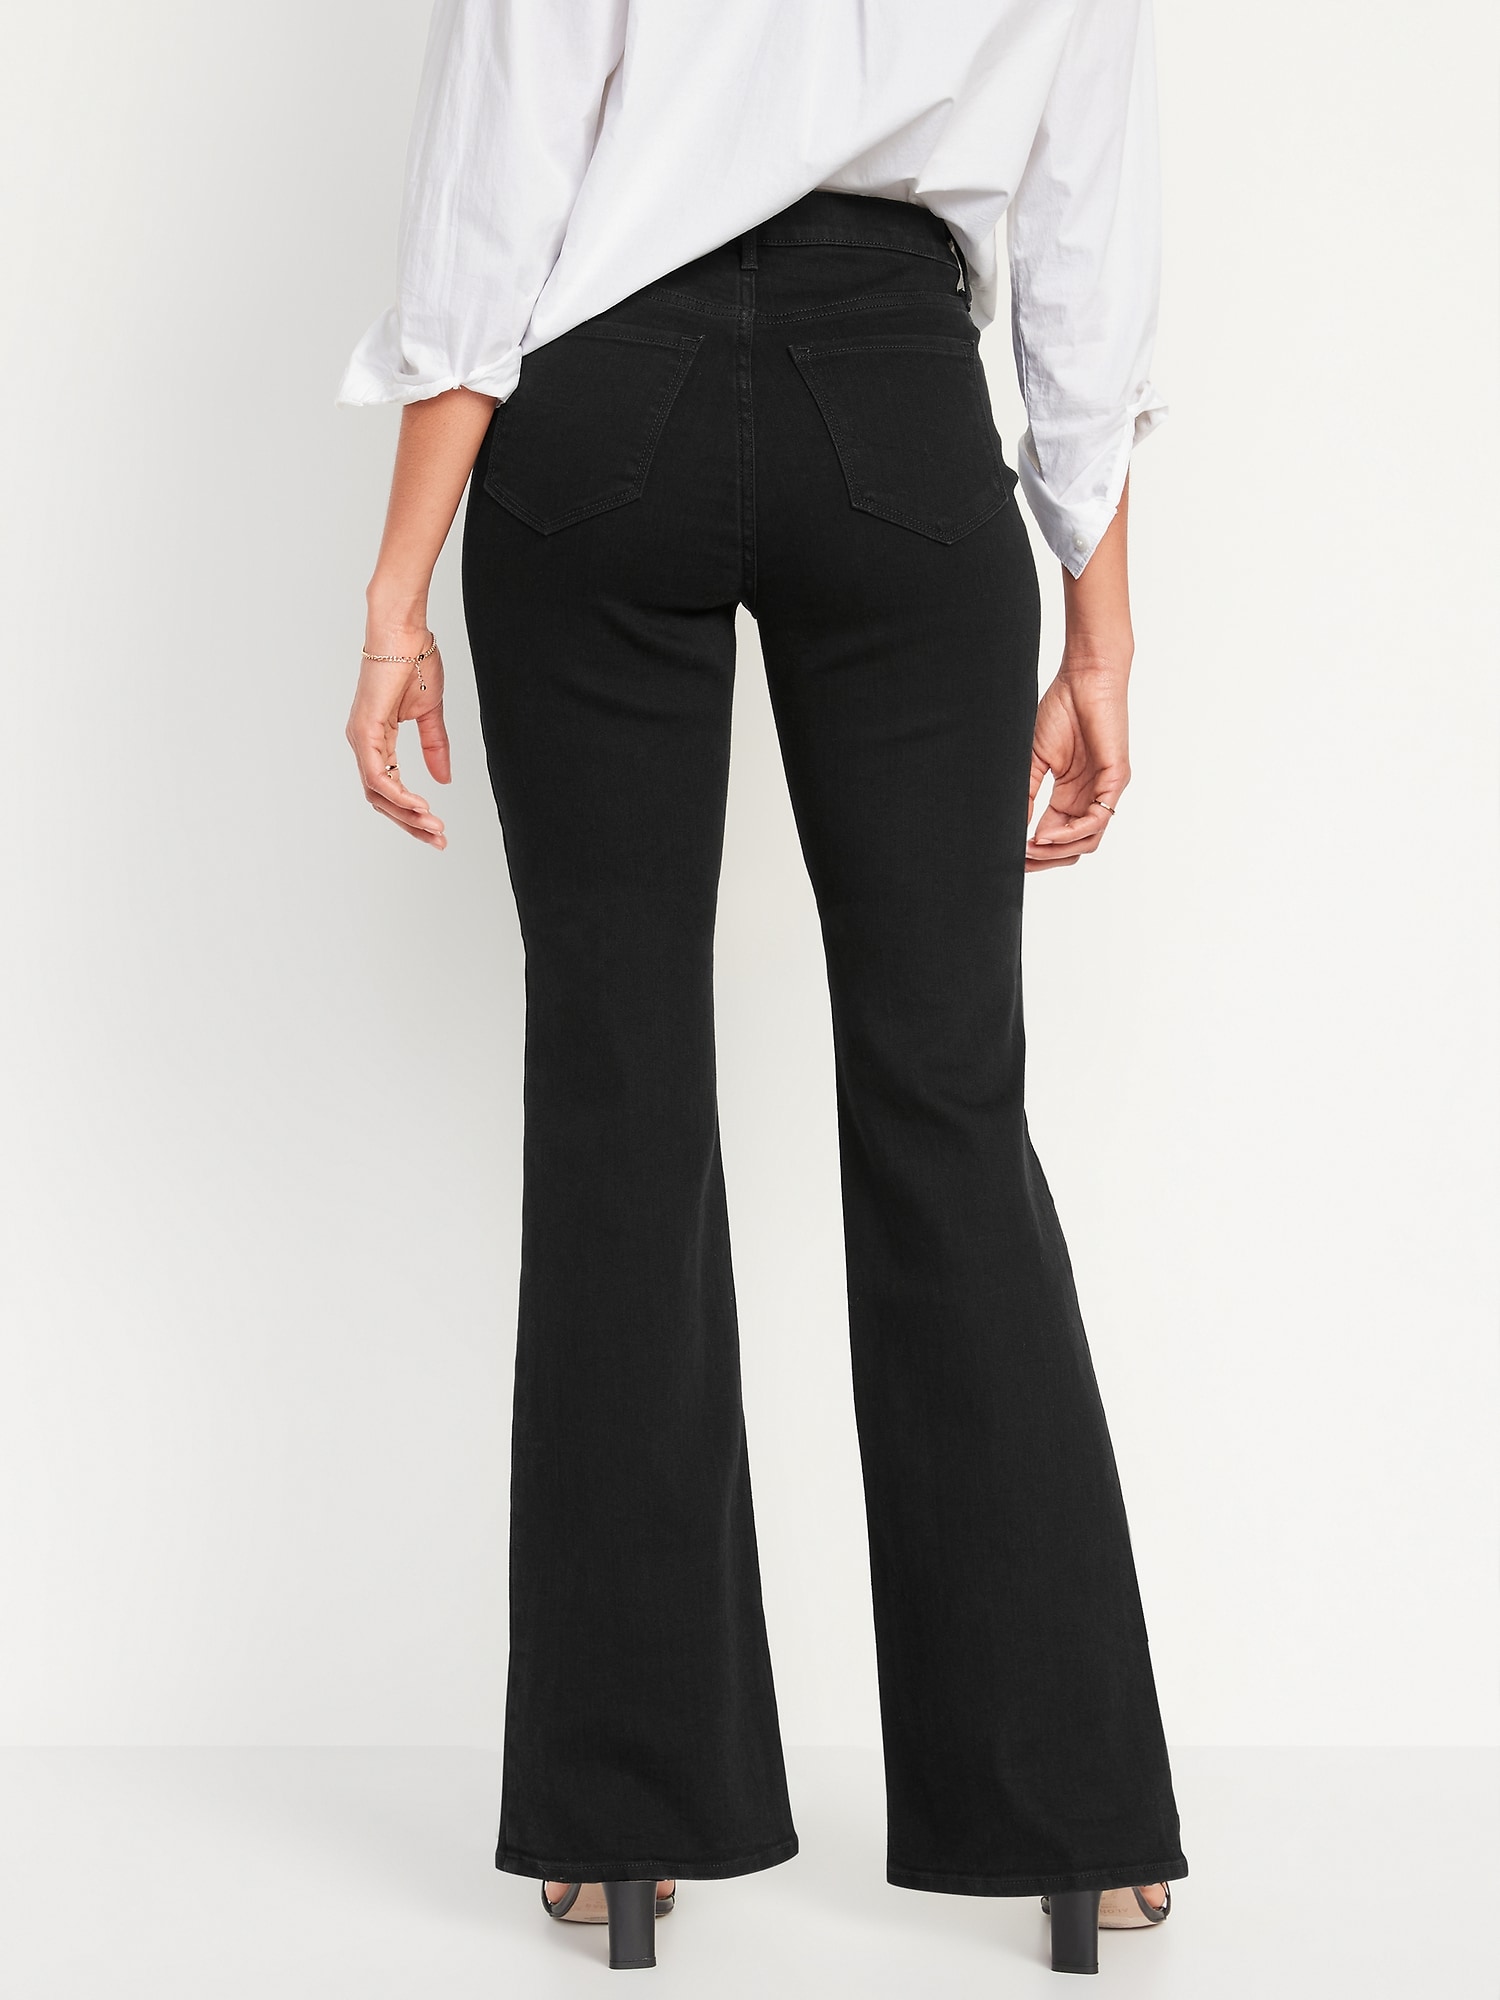 High-Waisted Wow Flare Jeans | Old Navy